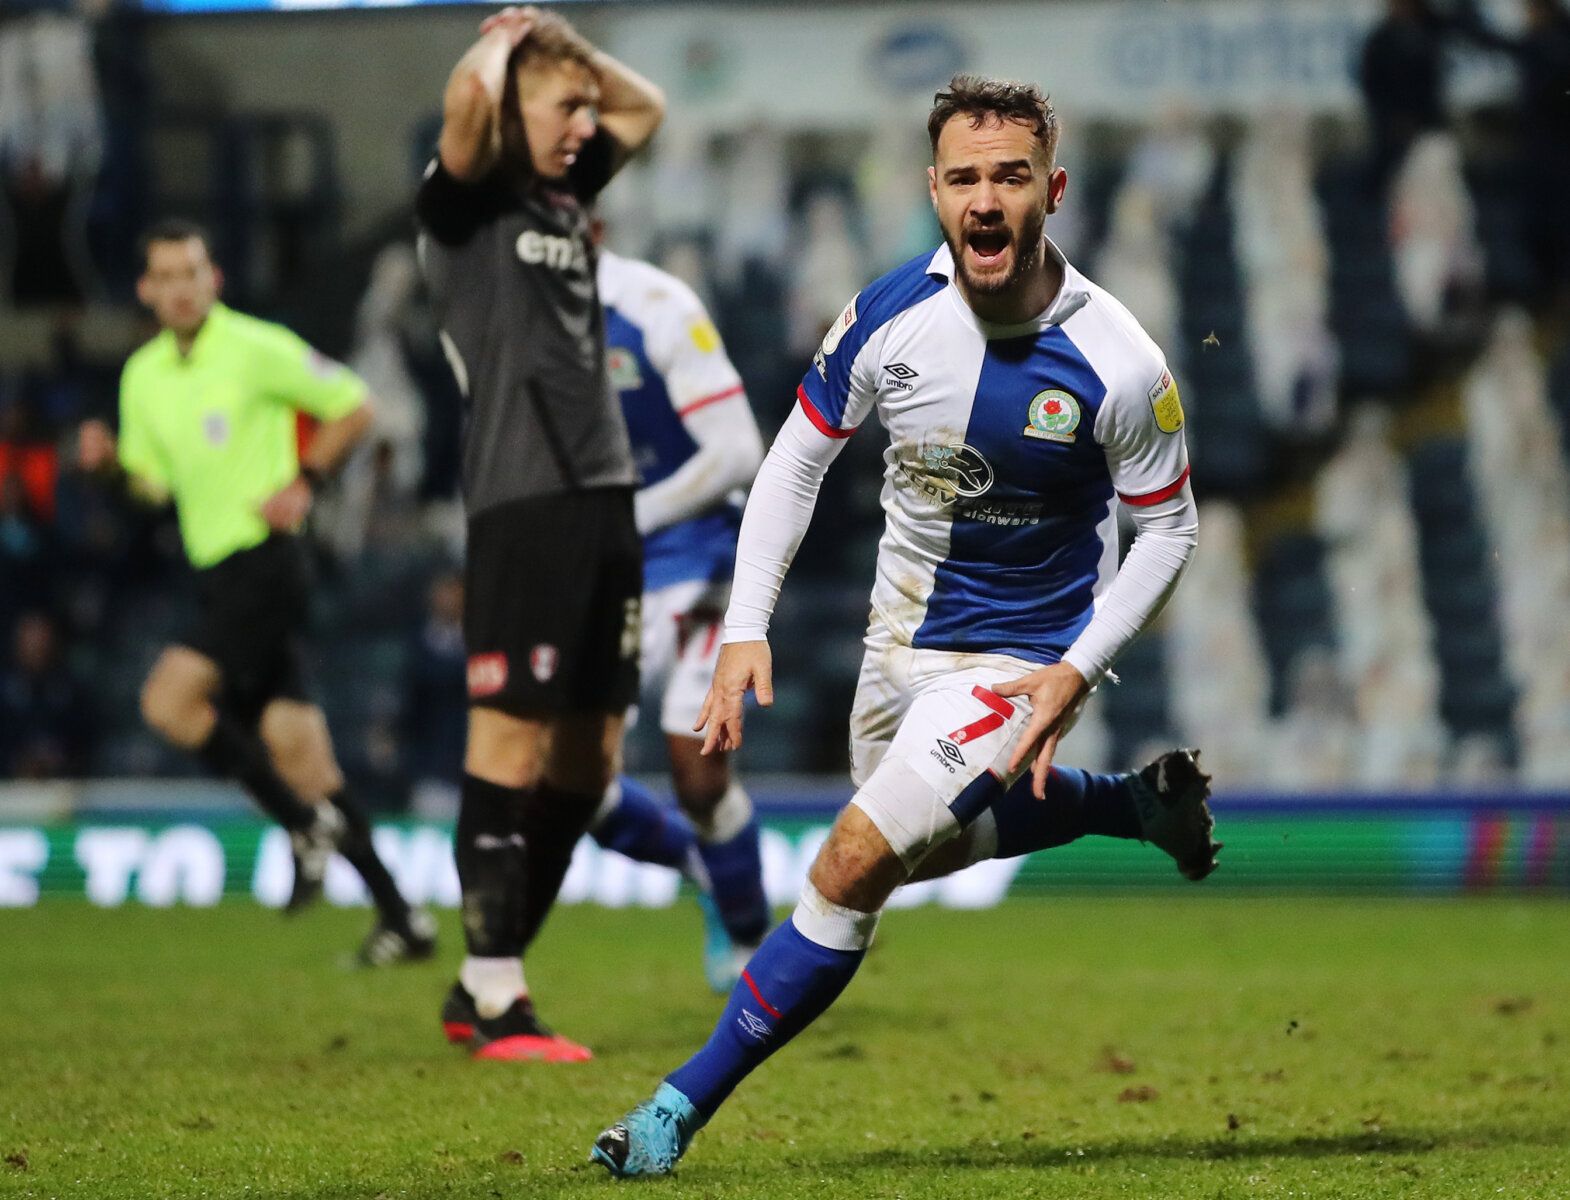 Soccer Football - Championship - Blackburn Rovers v Rotherham United - Ewood Park, Blackburn, Britain - December 16, 2020 Blackburn Rovers' Adam Armstrong celebrates scoring their second goal Action Images/Molly Darlington EDITORIAL USE ONLY. No use with unauthorized audio, video, data, fixture lists, club/league logos or 'live' services. Online in-match use limited to 75 images, no video emulation. No use in betting, games or single club /league/player publications.  Please contact your account